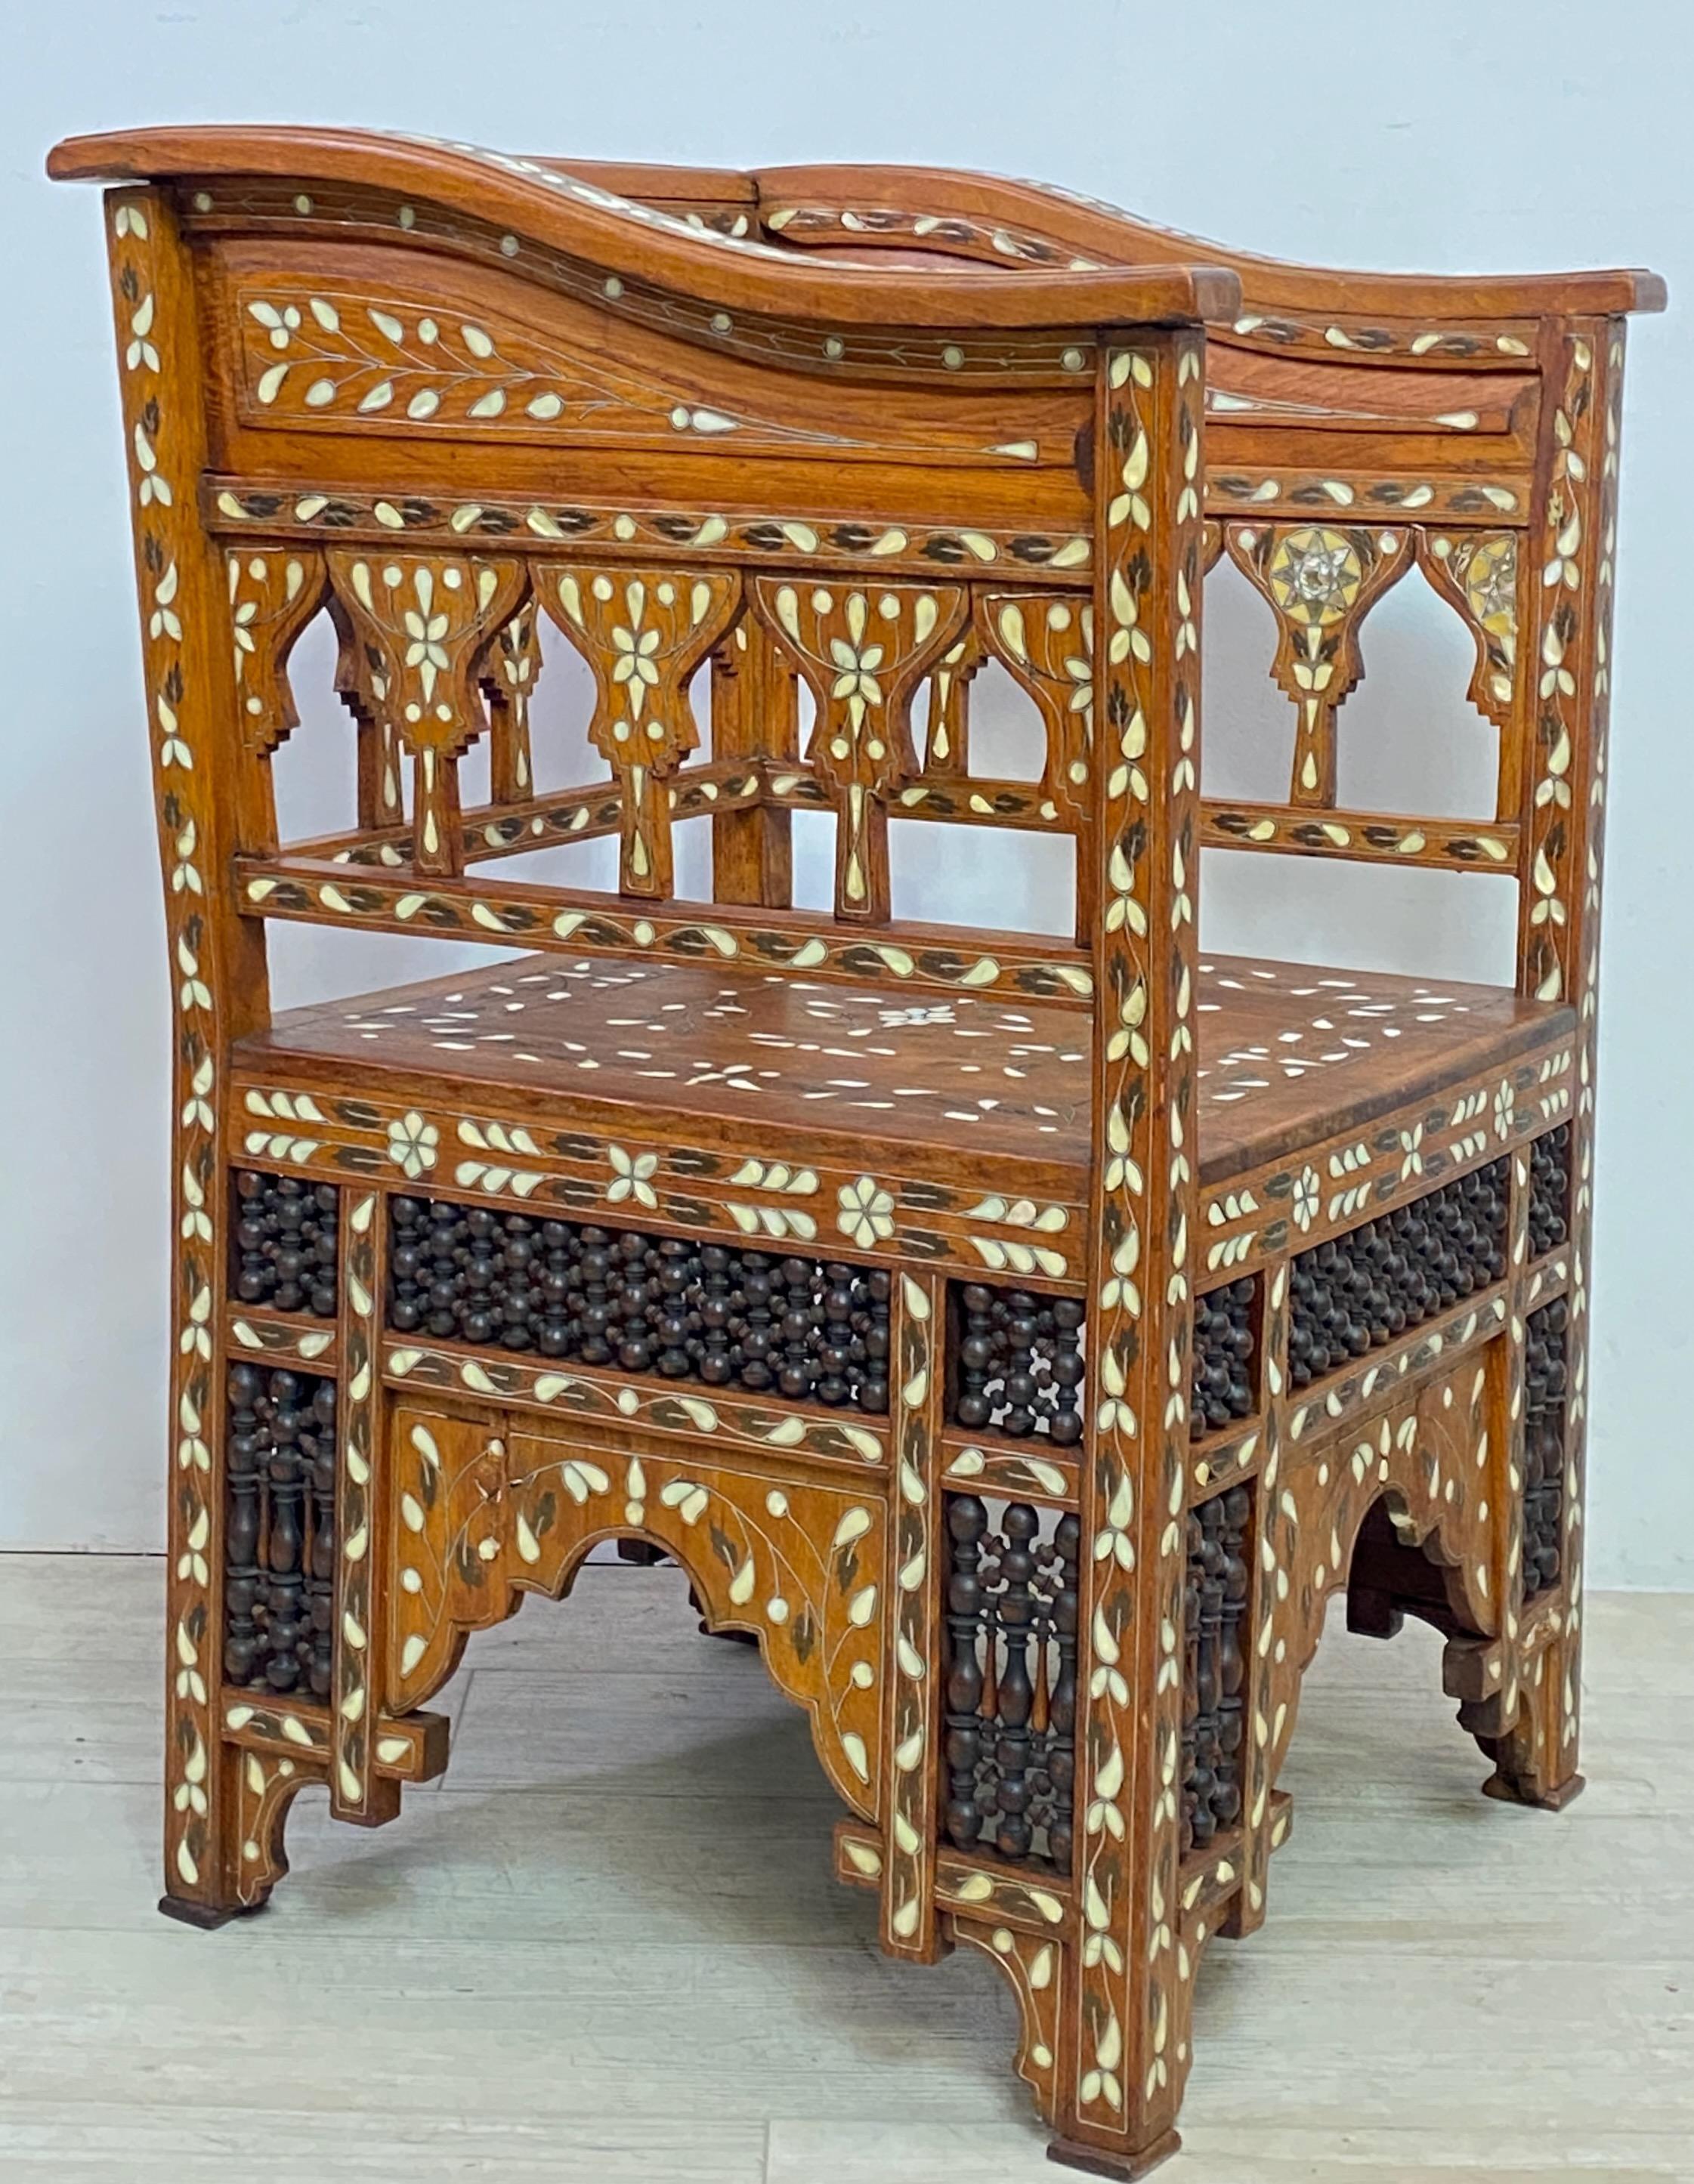 Moorish Syrian Walnut Chair with Mixed Inlay, Late 19th-Early 20th Century  For Sale